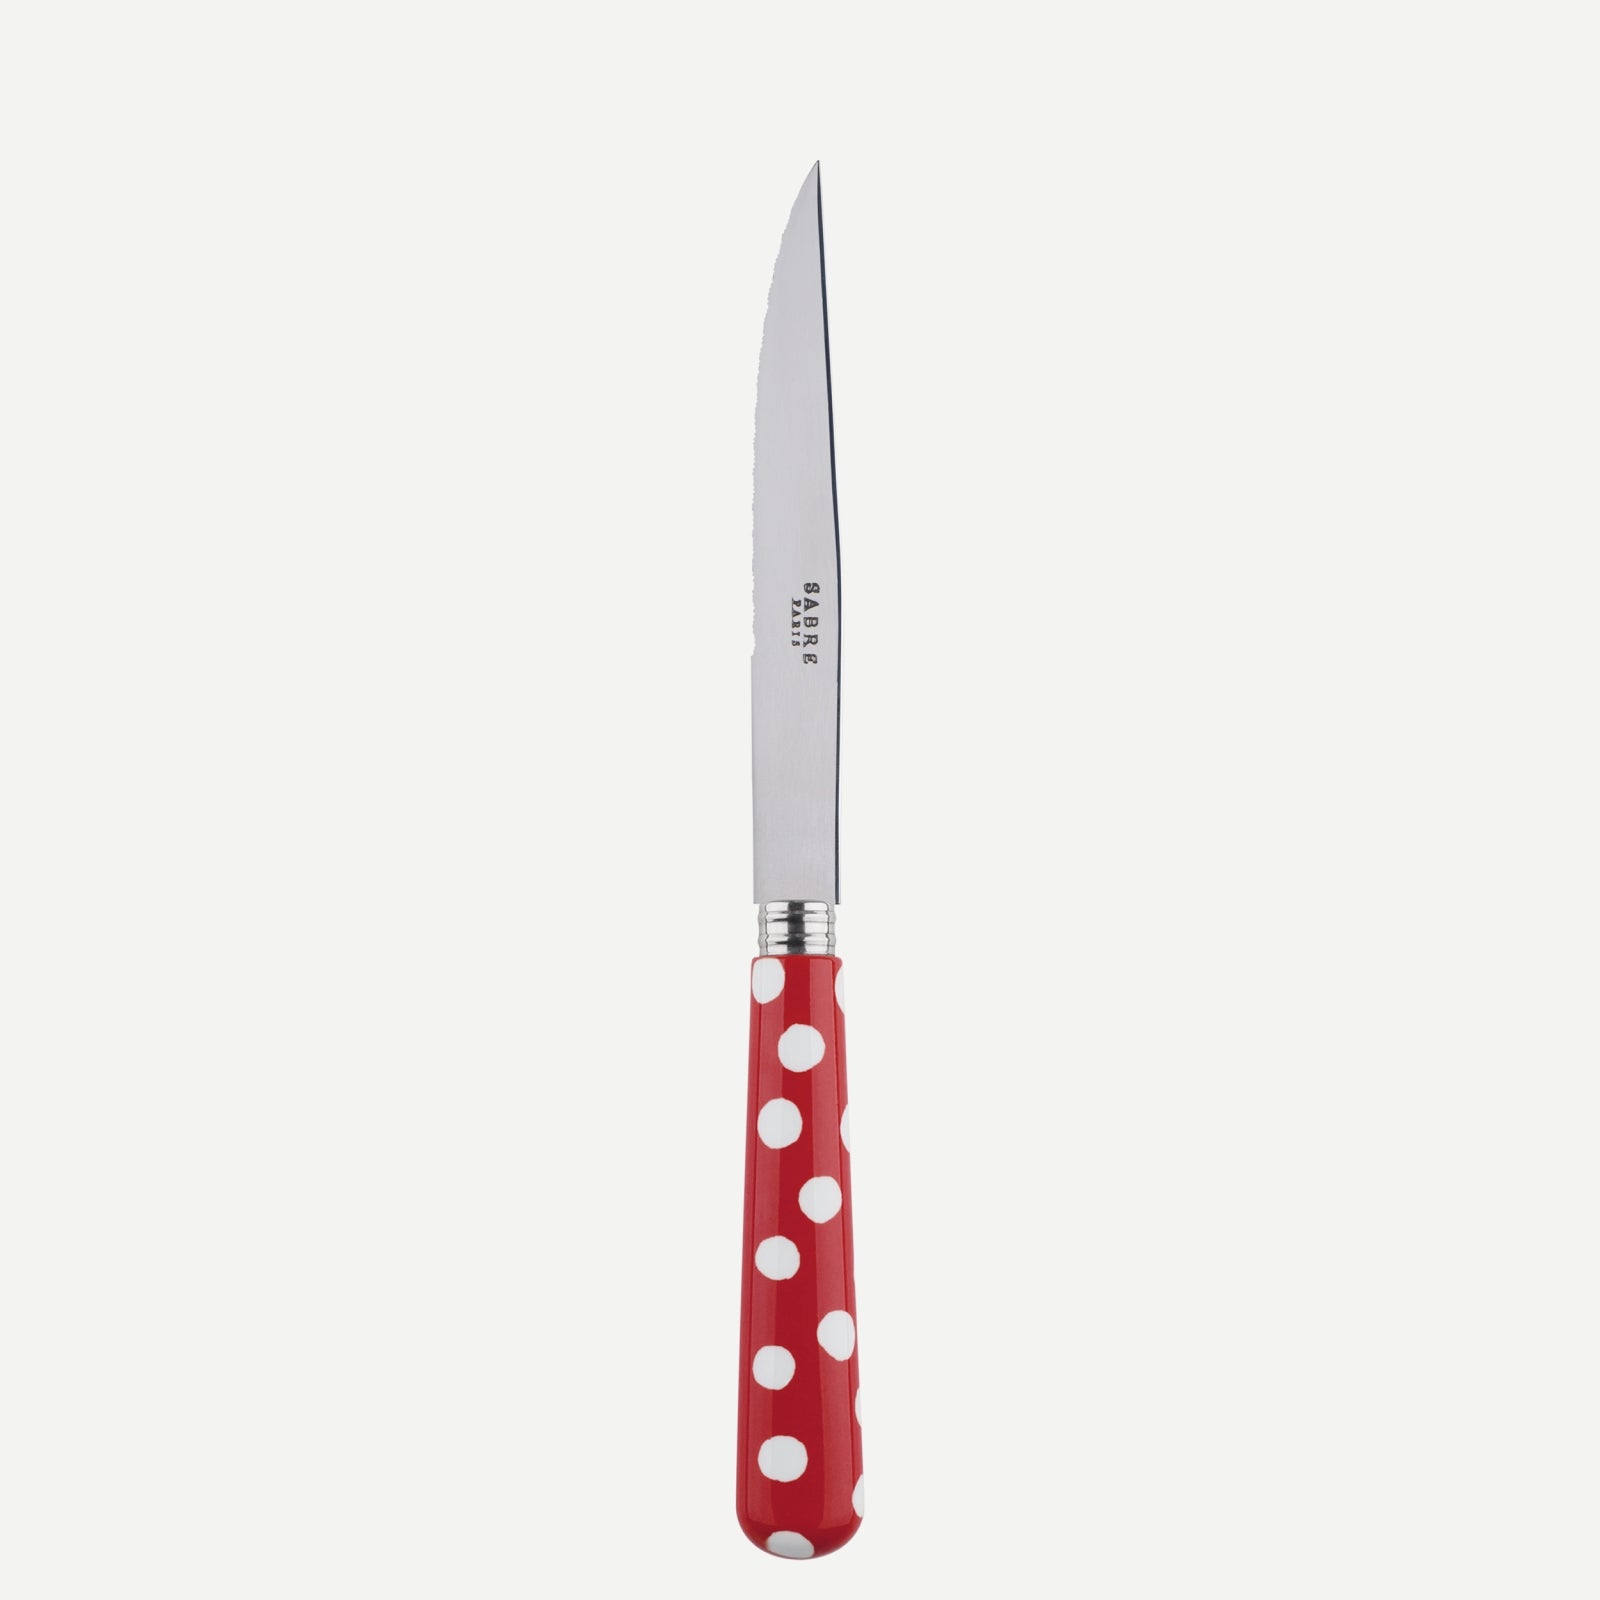 Steack knife - White Dots. - Red